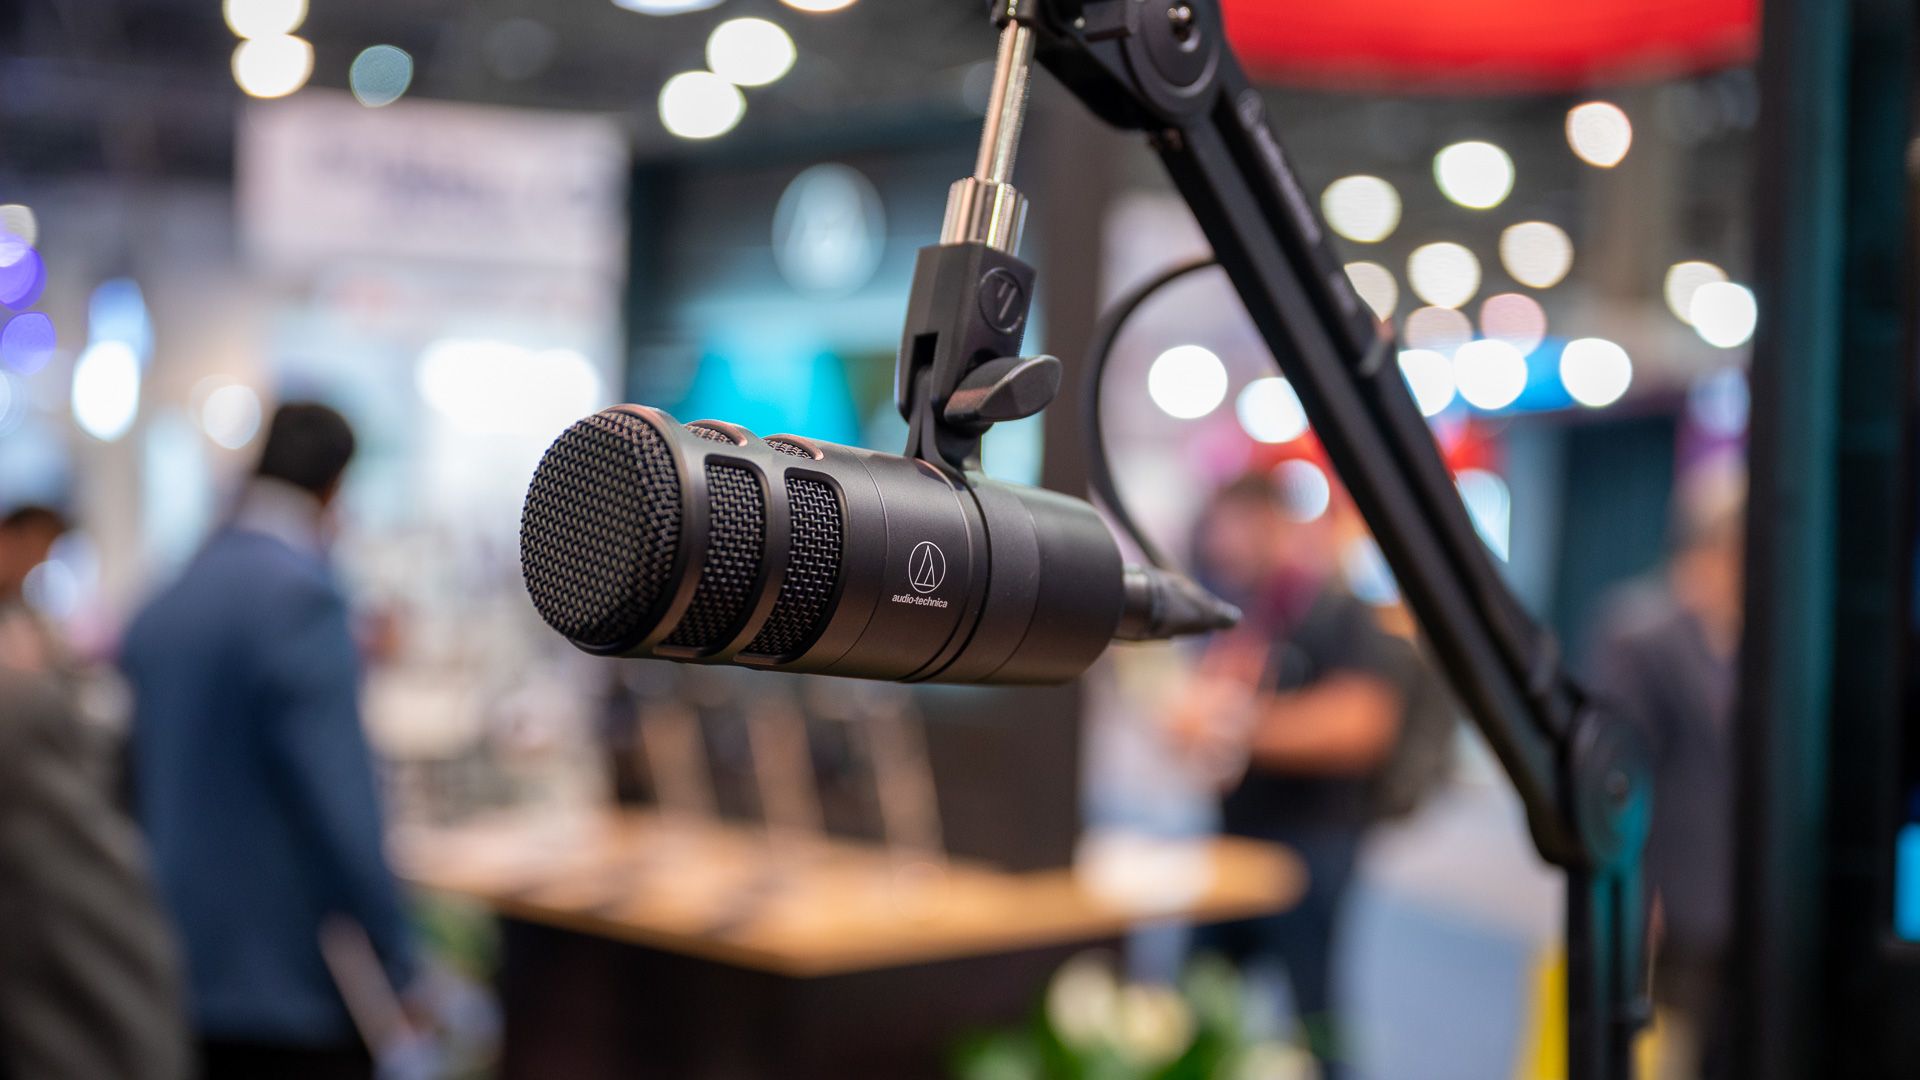 Audio-Technical AT 2040 Hypercardioid Dynamic Podcast Microphone at CES 2023.